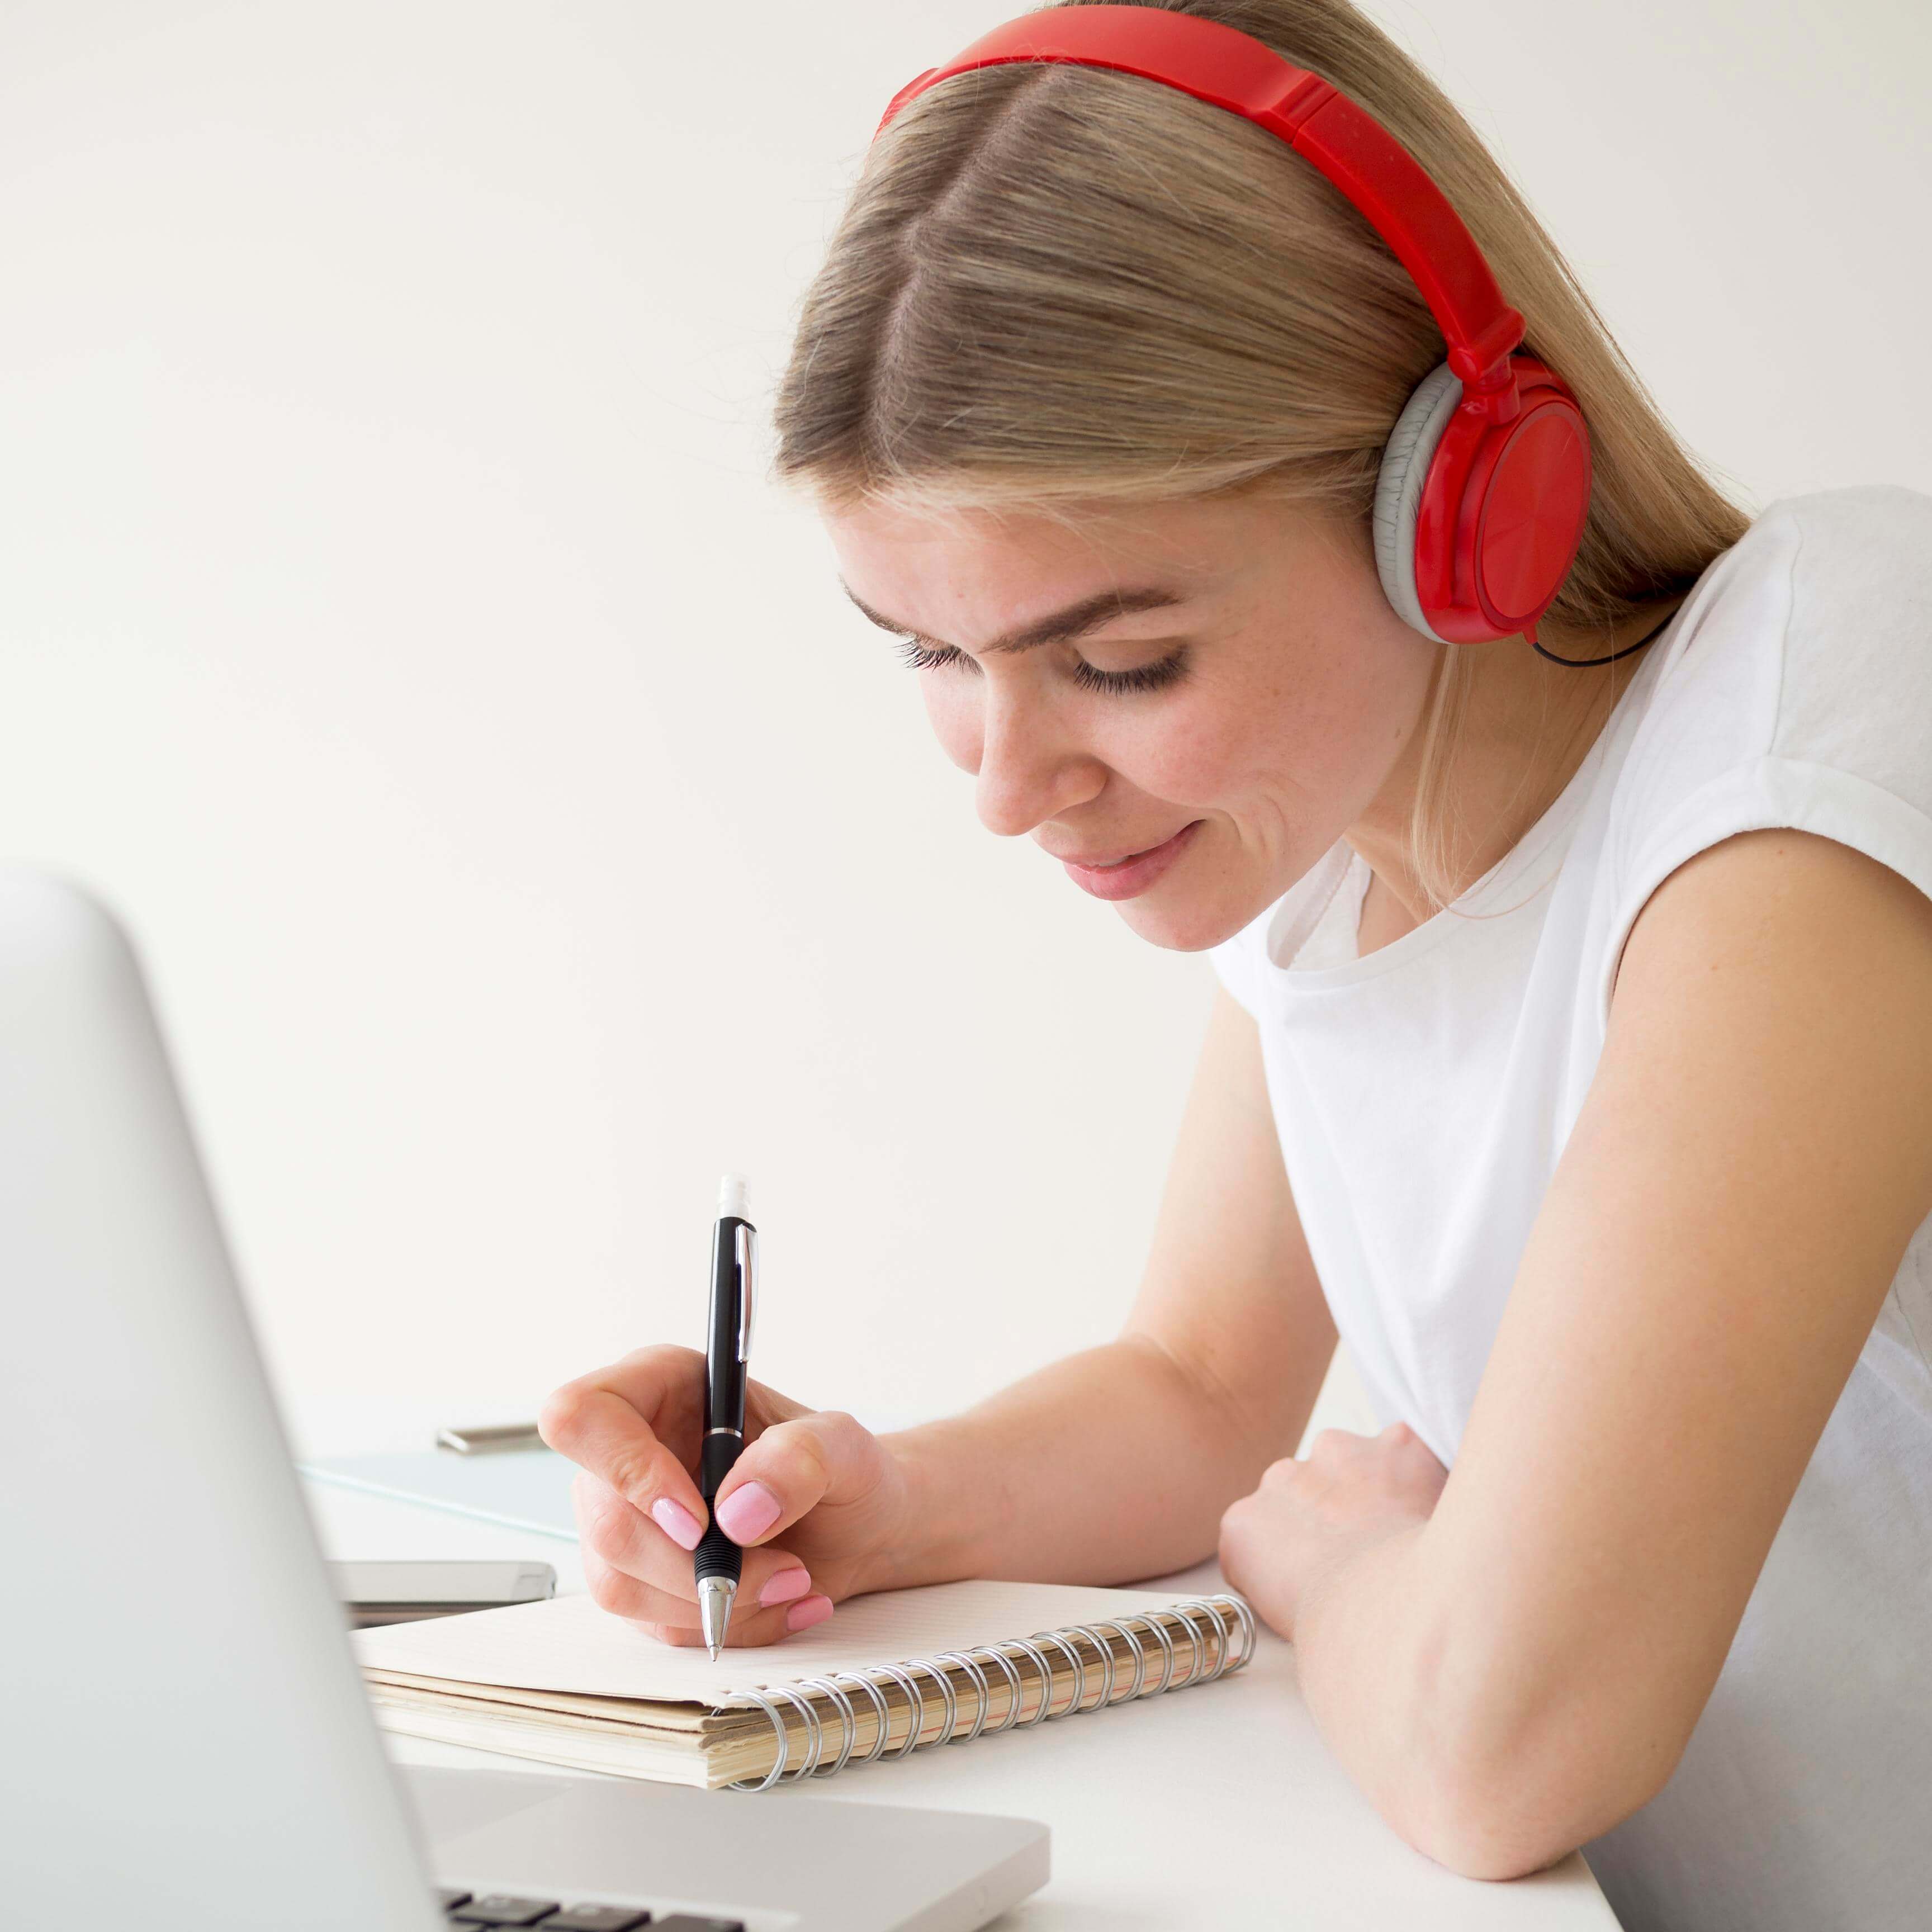 Online summer courses for kids and adults